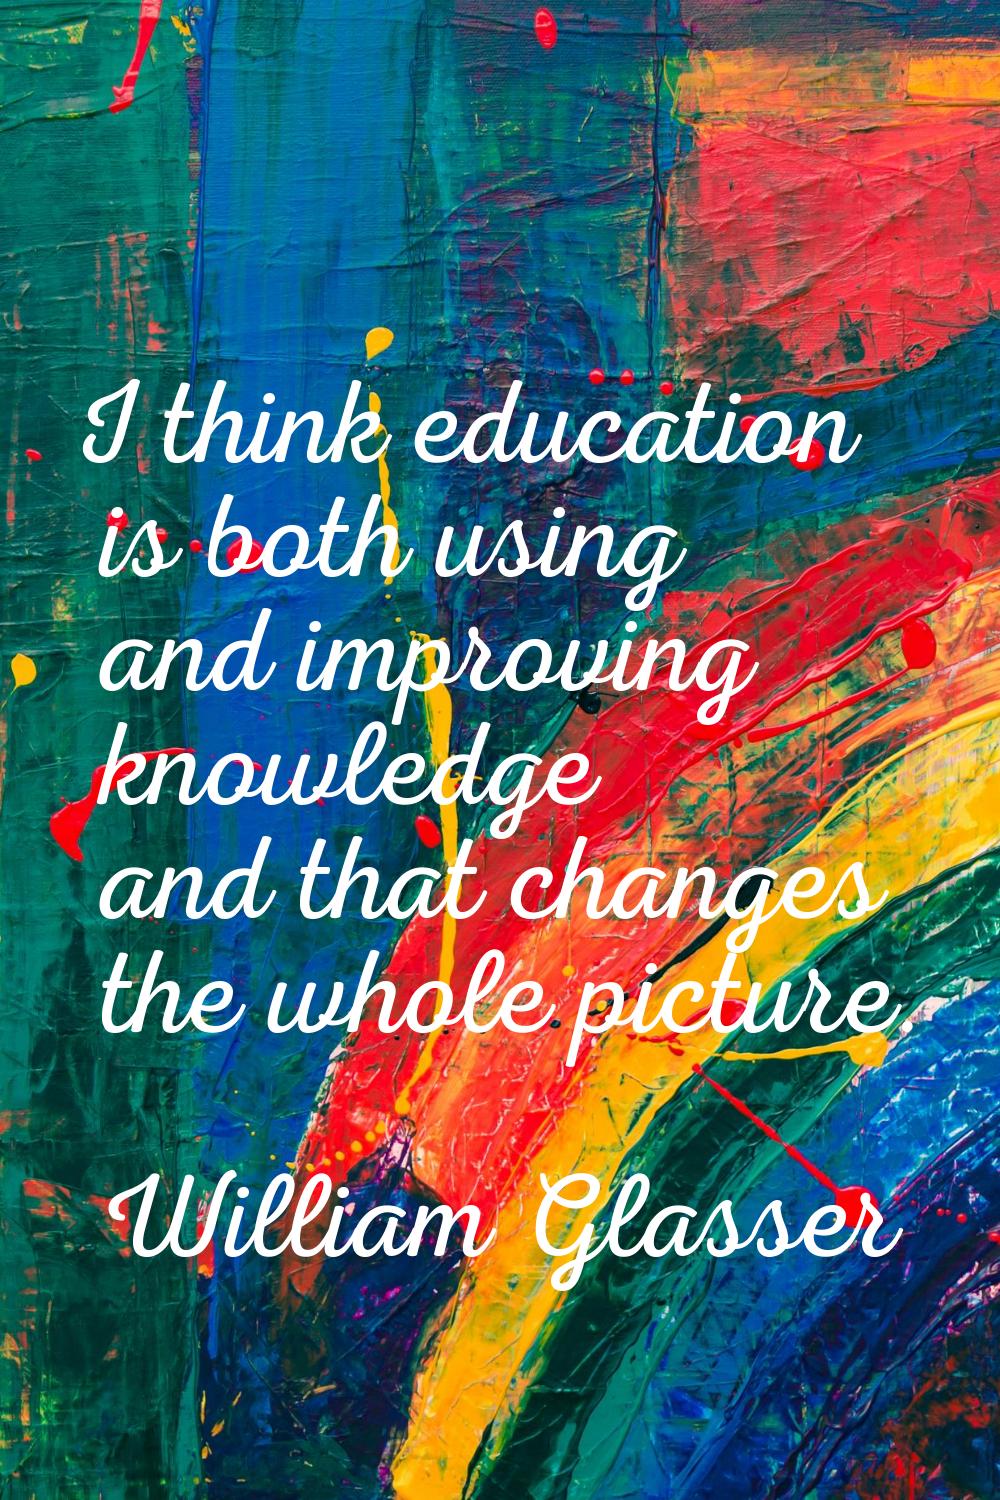 I think education is both using and improving knowledge and that changes the whole picture.